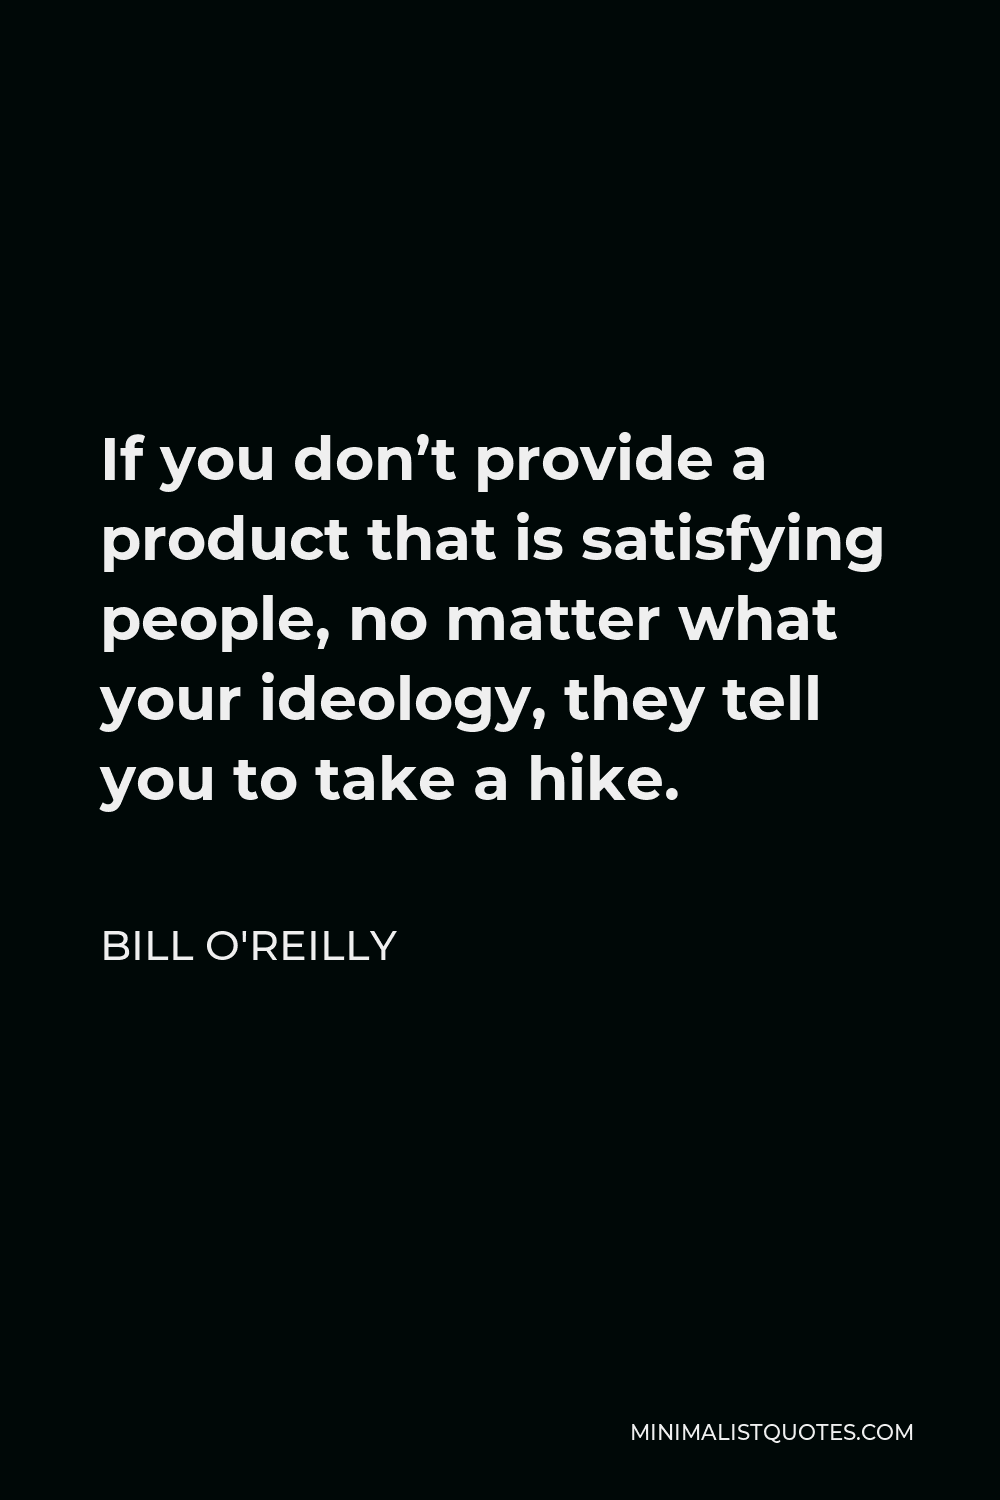 Bill O'Reilly Quote - If you don’t provide a product that is satisfying people, no matter what your ideology, they tell you to take a hike.